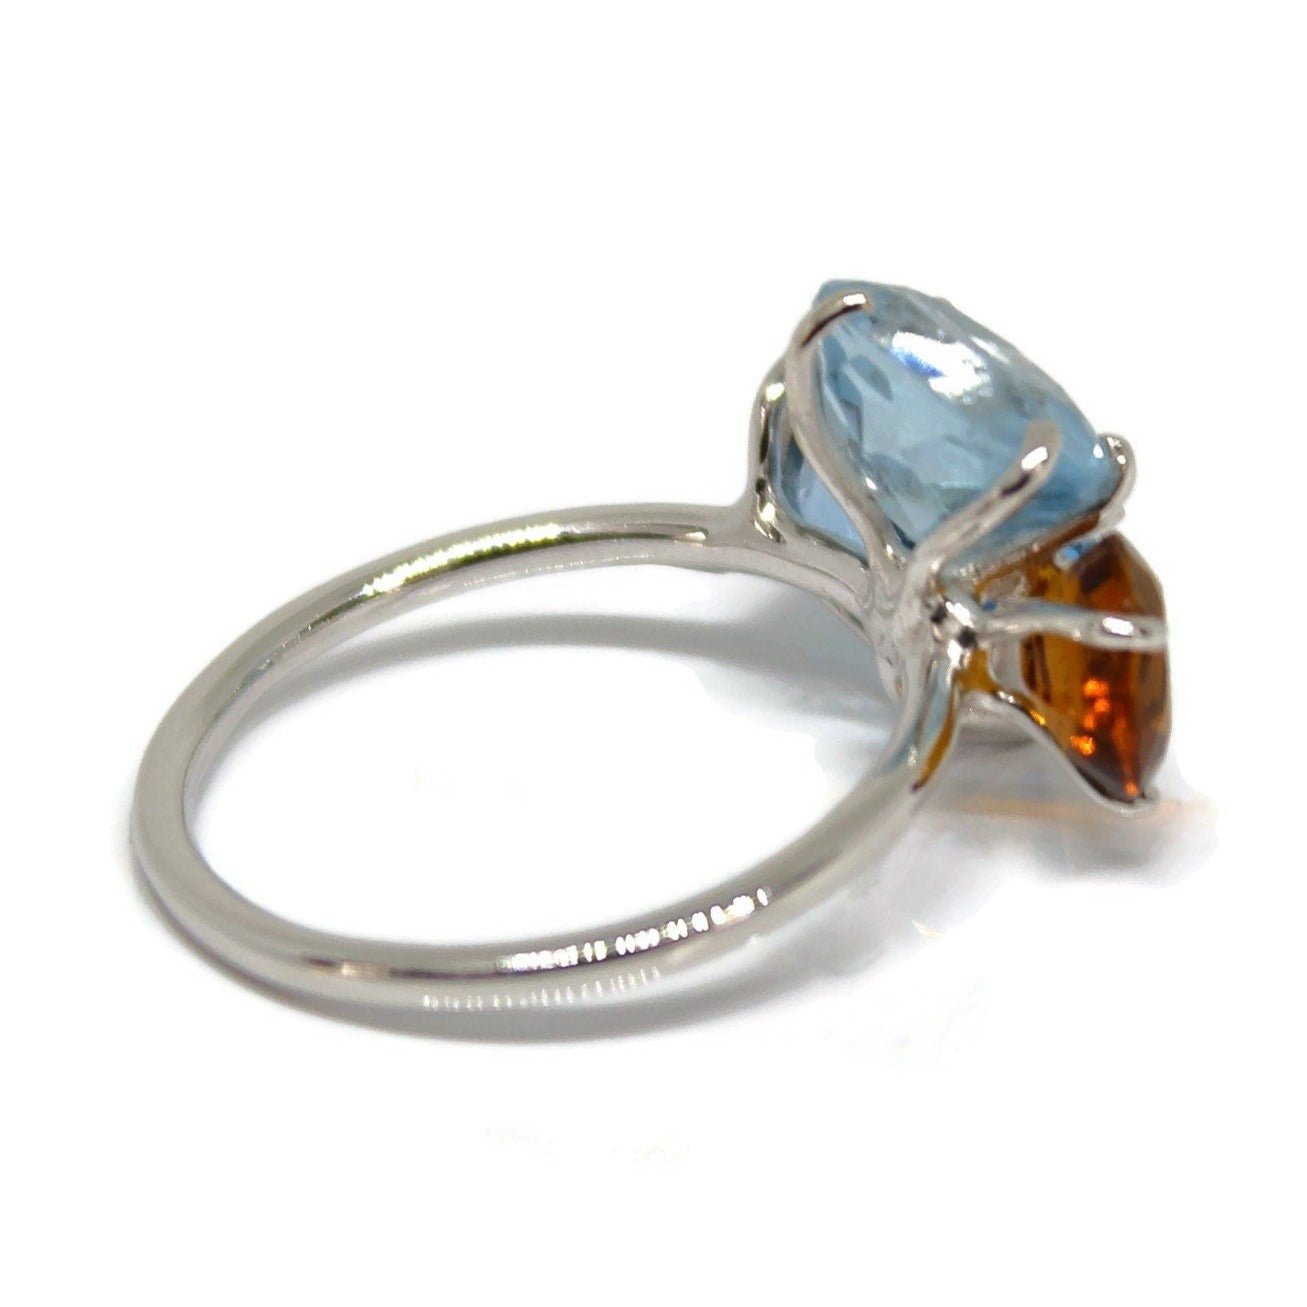 Blue Topaz, Aquamarine, and Tourmaline white gold ring, 18k Solid Gold Gemstones Ring - R. Mouzannar Jewelry